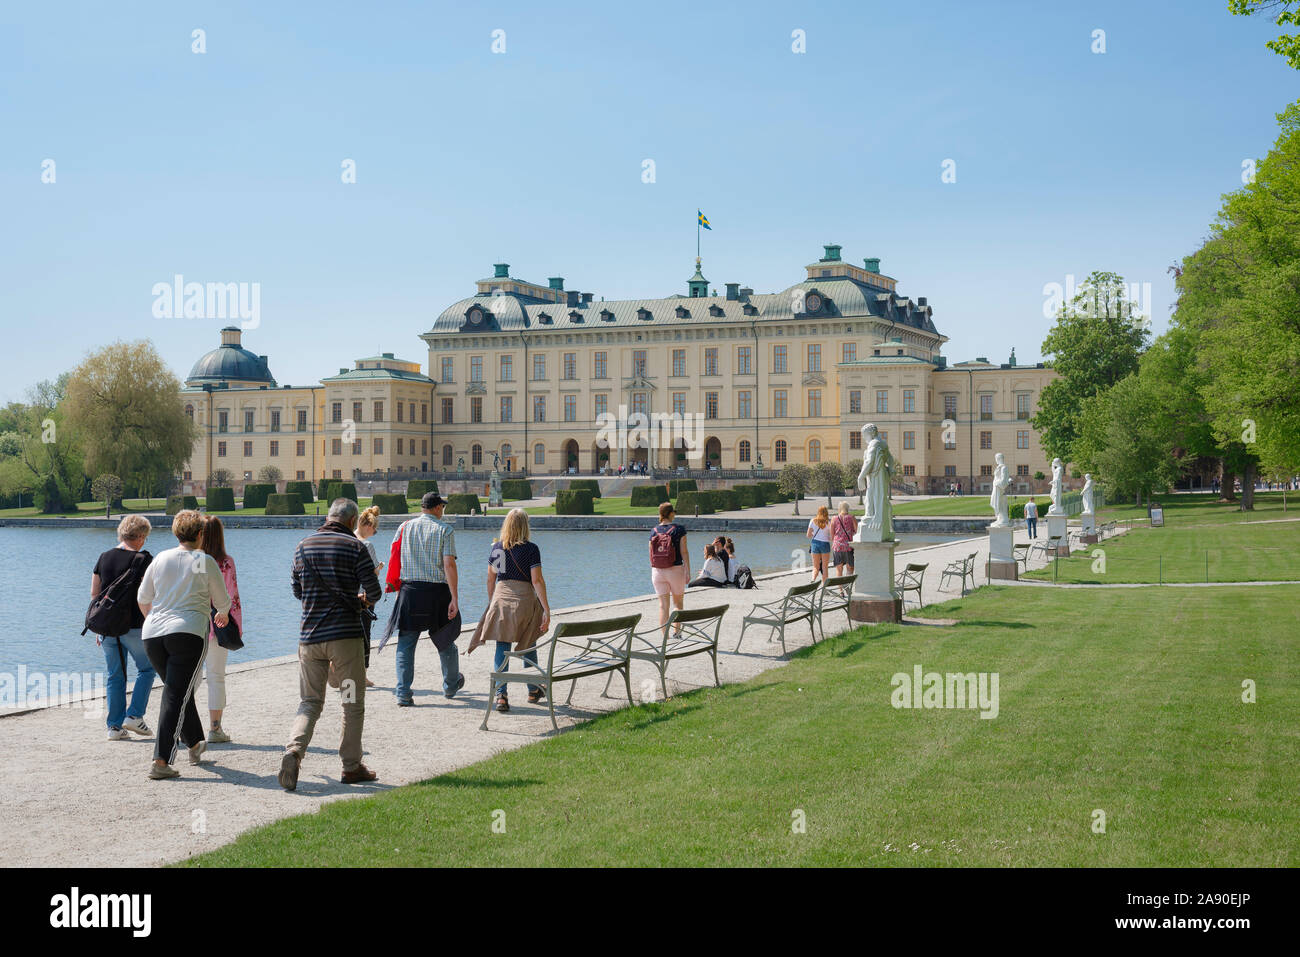 Tourism Europe, view in summer of tourists approaching the Swedish Royal Palace - Drottningholm (Drottningholms Slott) - on Lovön island, Sweden. Stock Photo